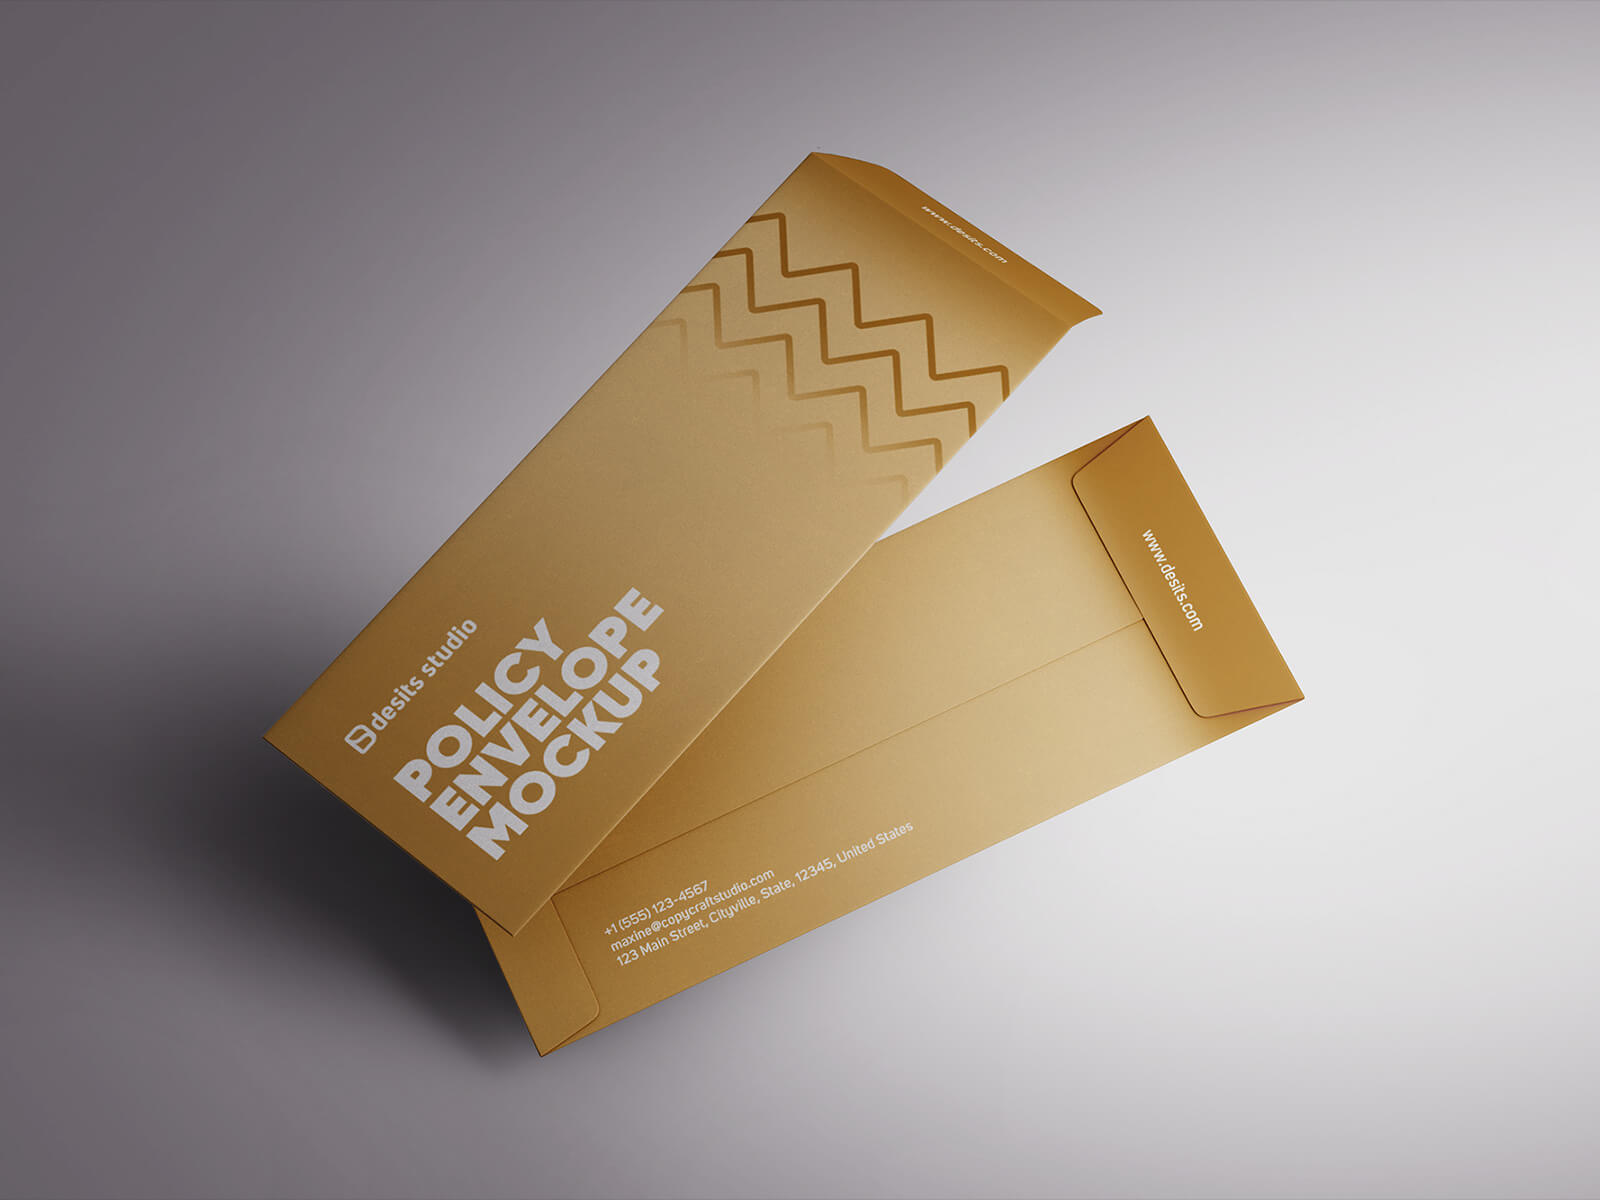 Free Policy Business Envelope Mockup PSD (1)